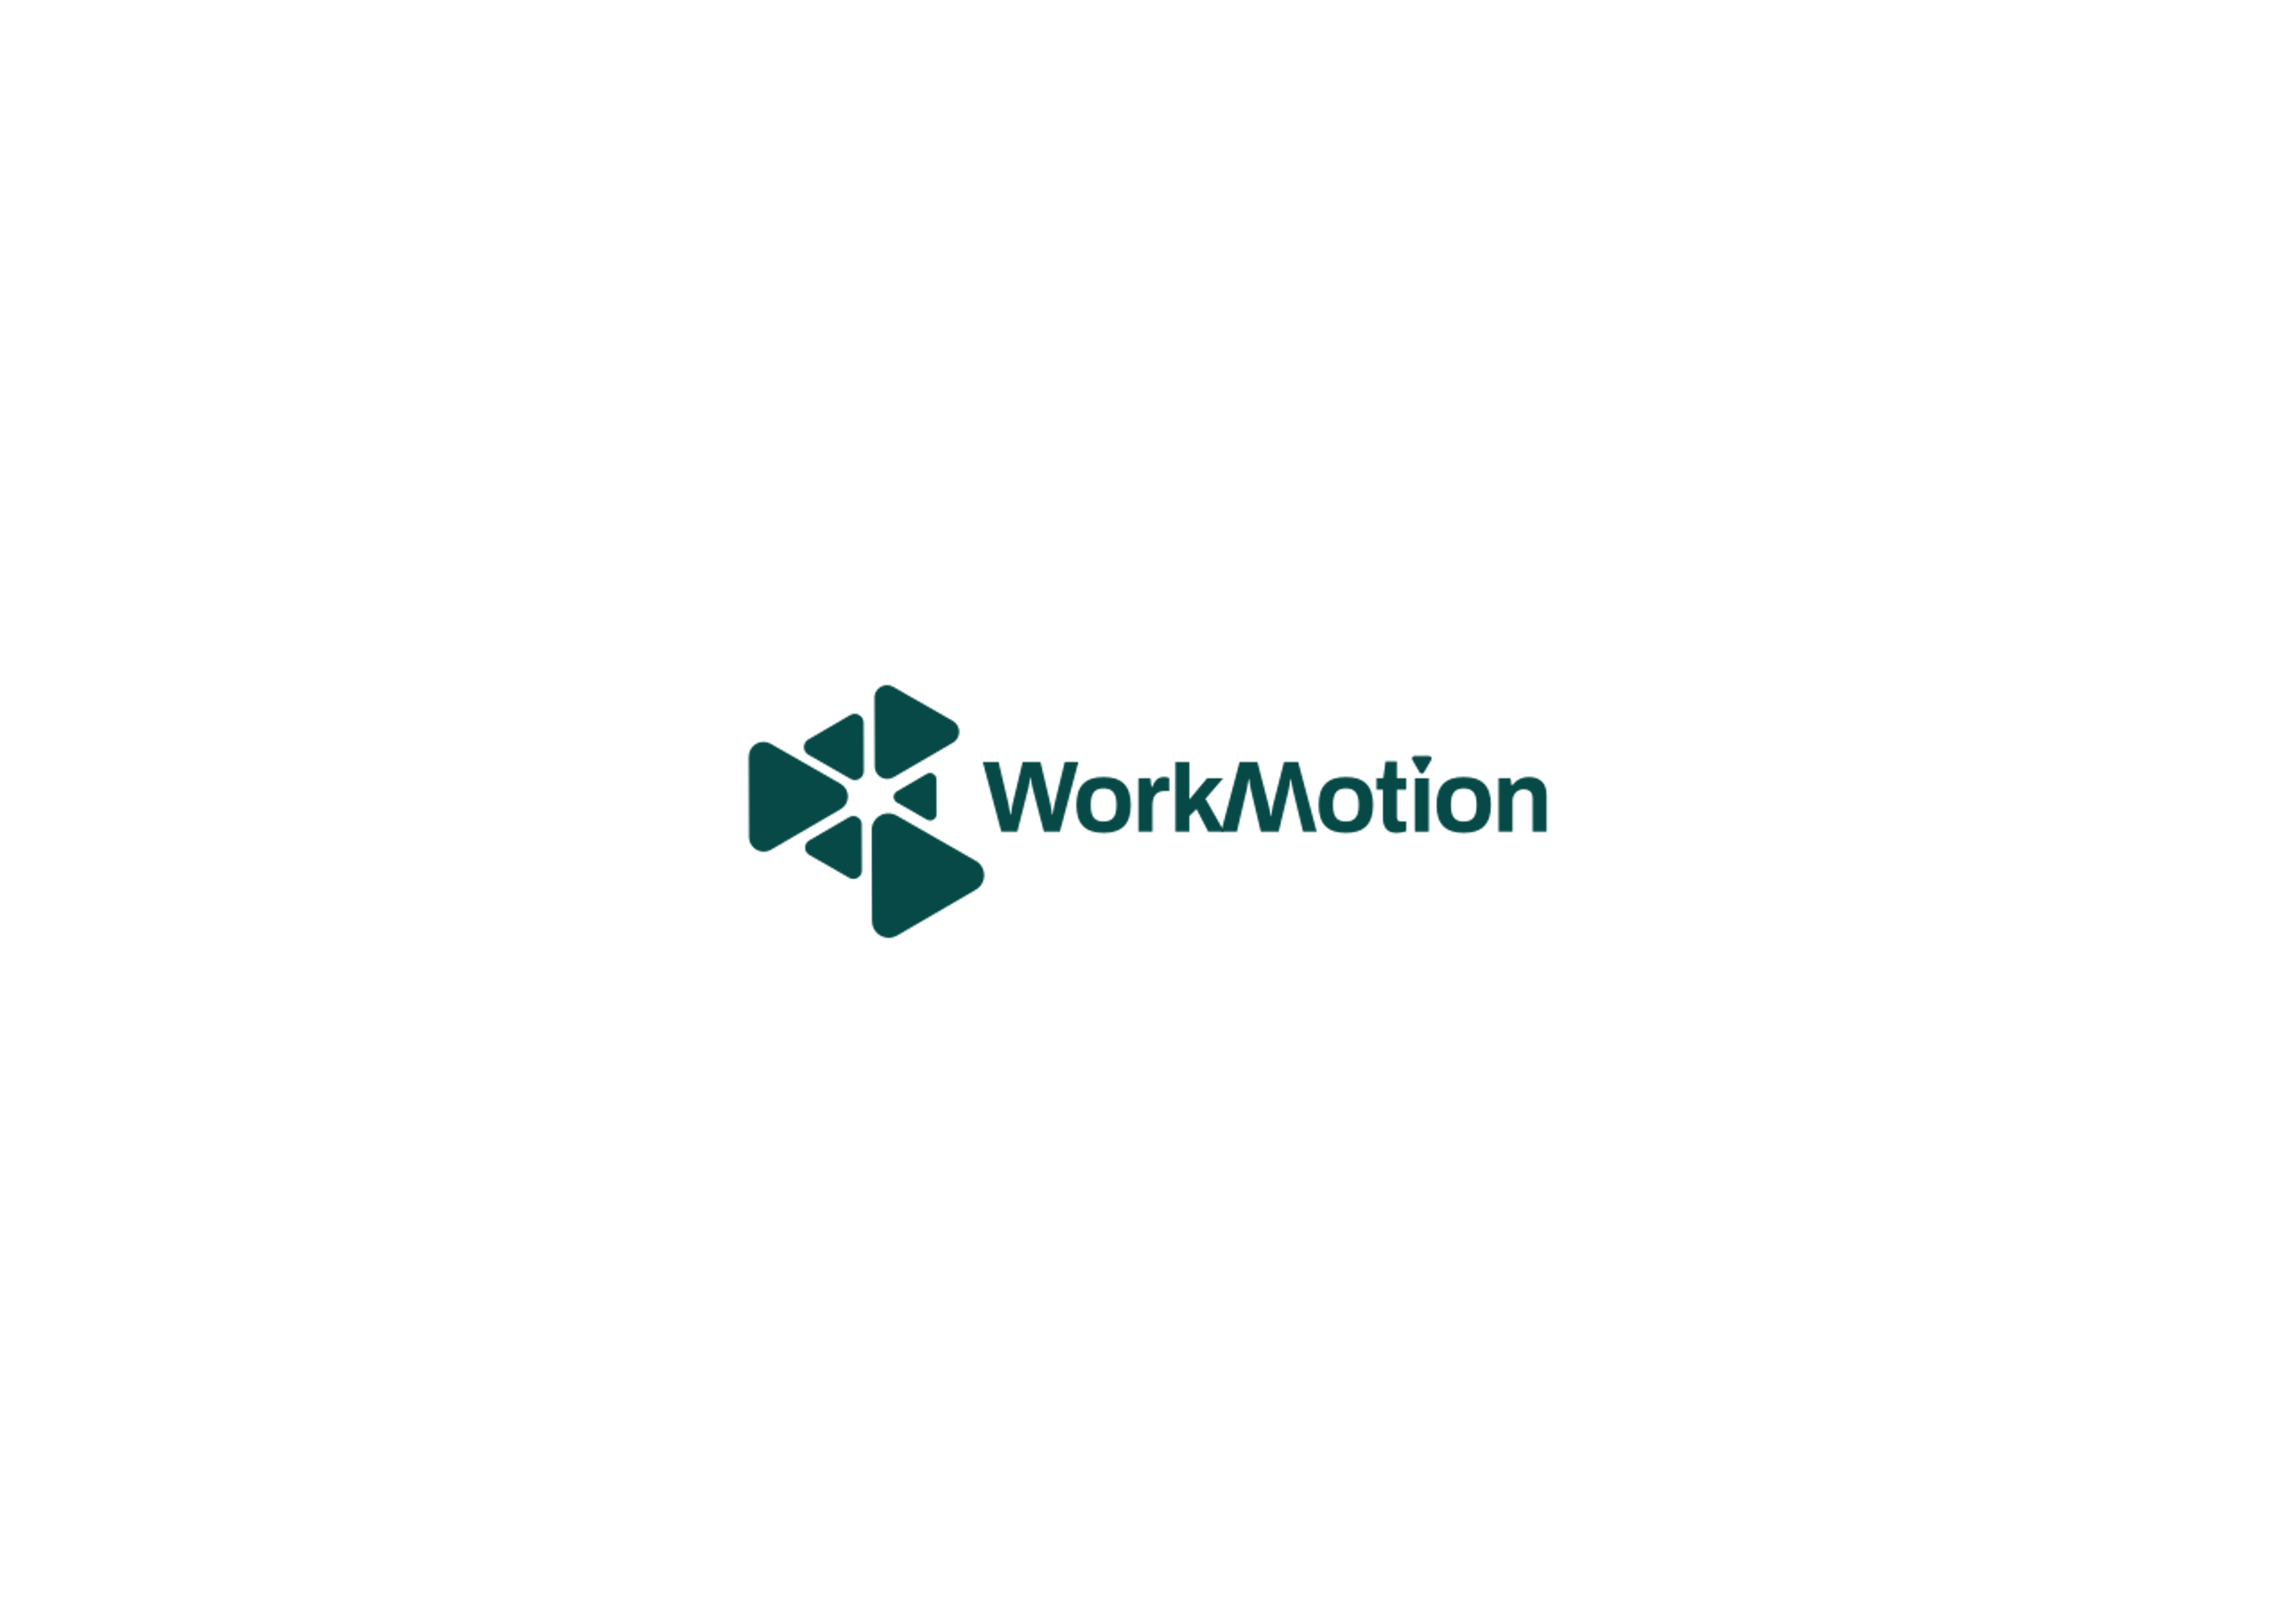 Workmotion